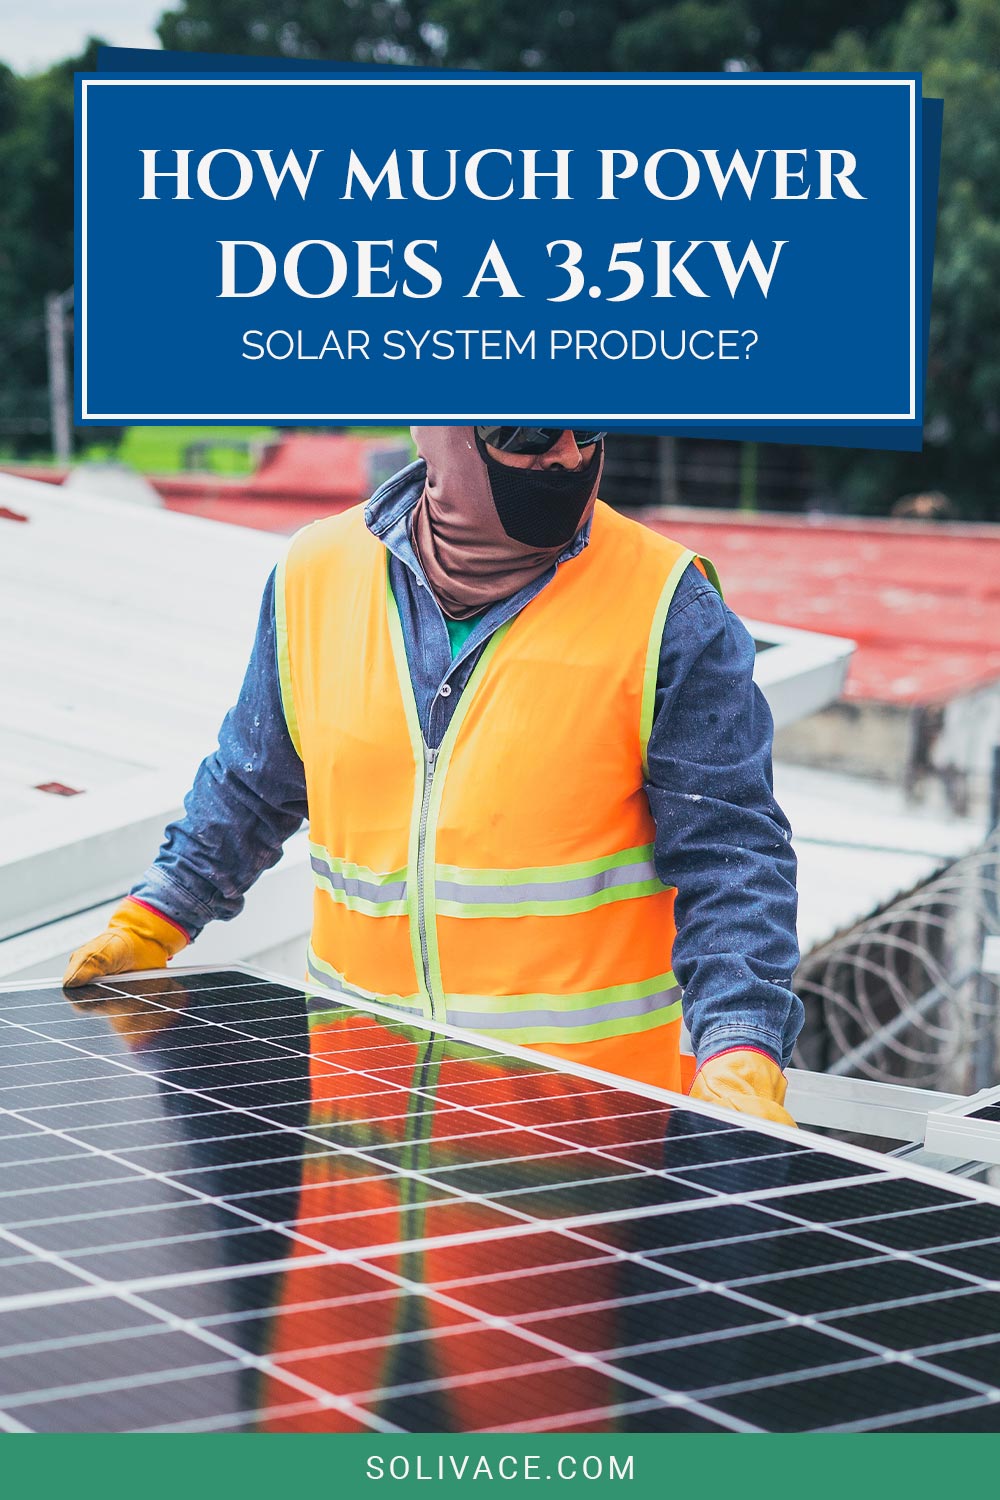 How Much Power Does a 3.5kw Solar System Produce?